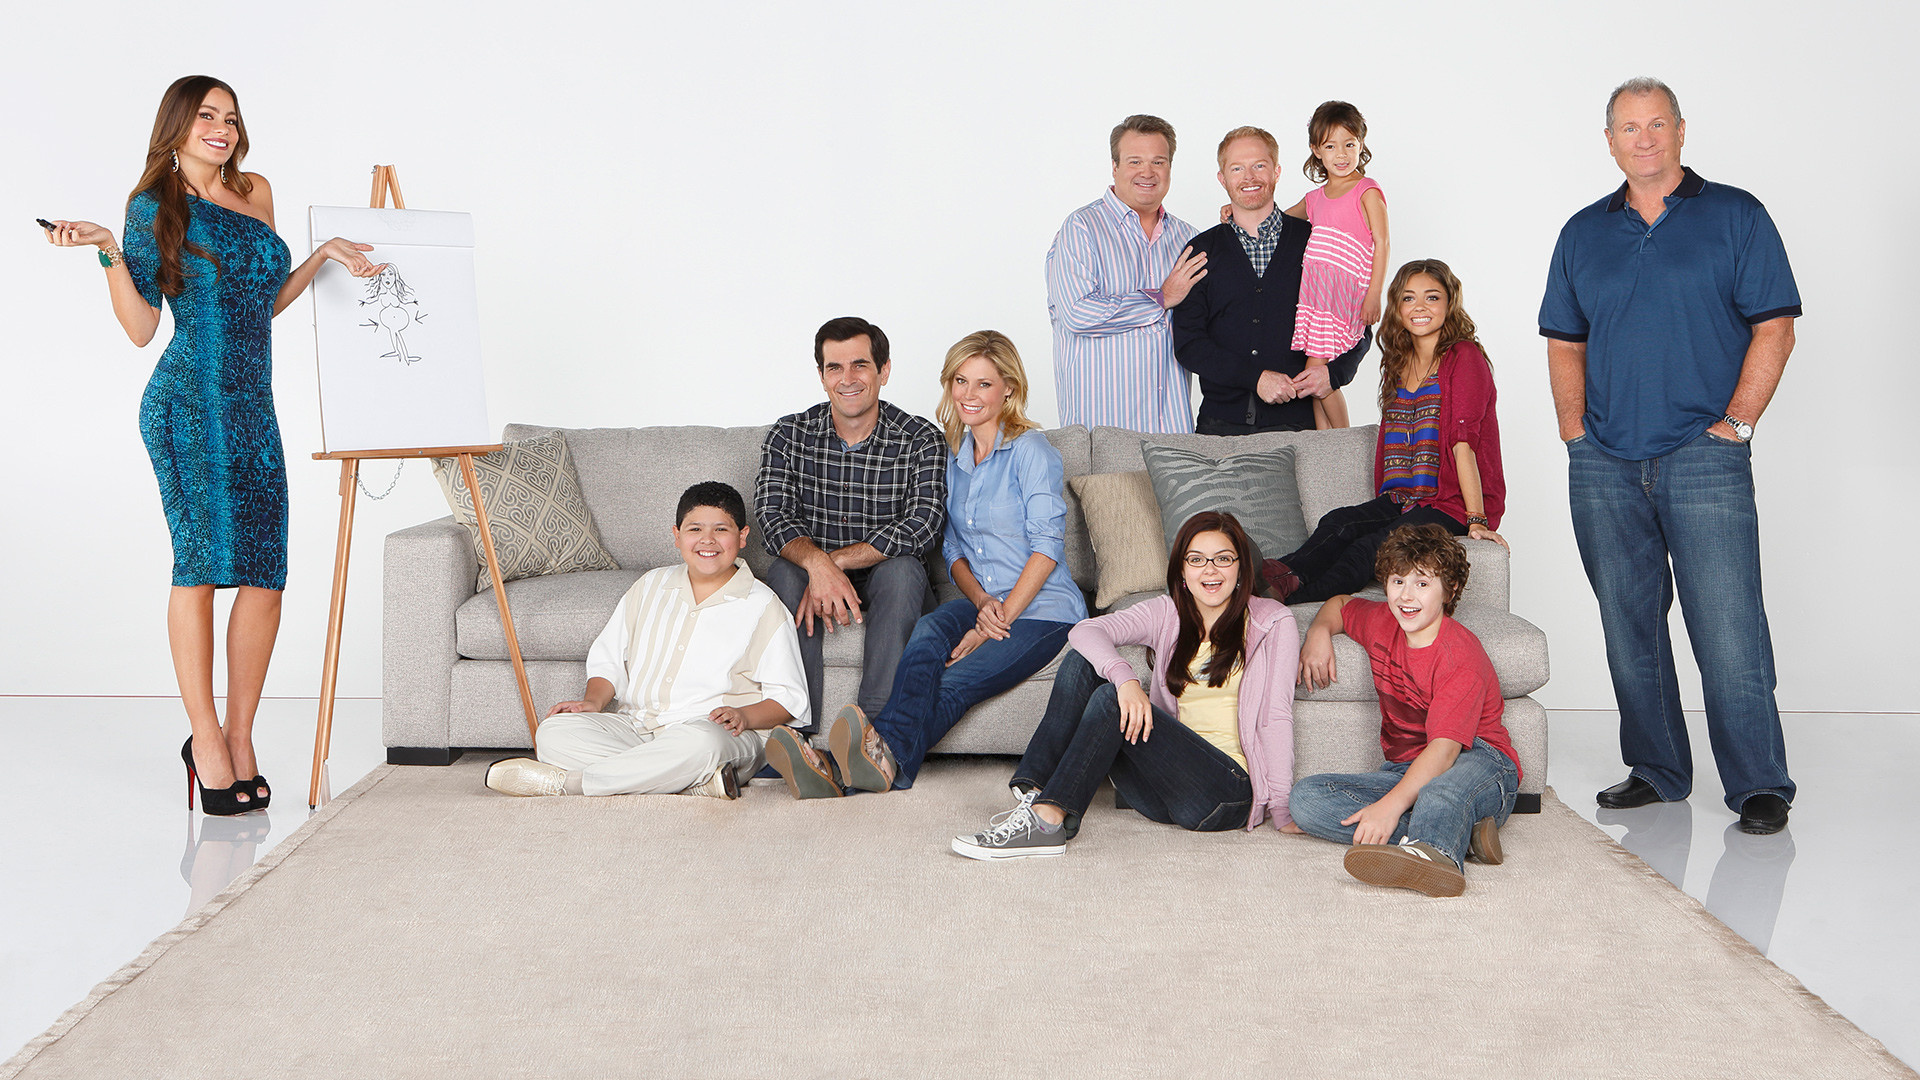 60+ Modern Family HD Wallpapers and Backgrounds 1920x1080